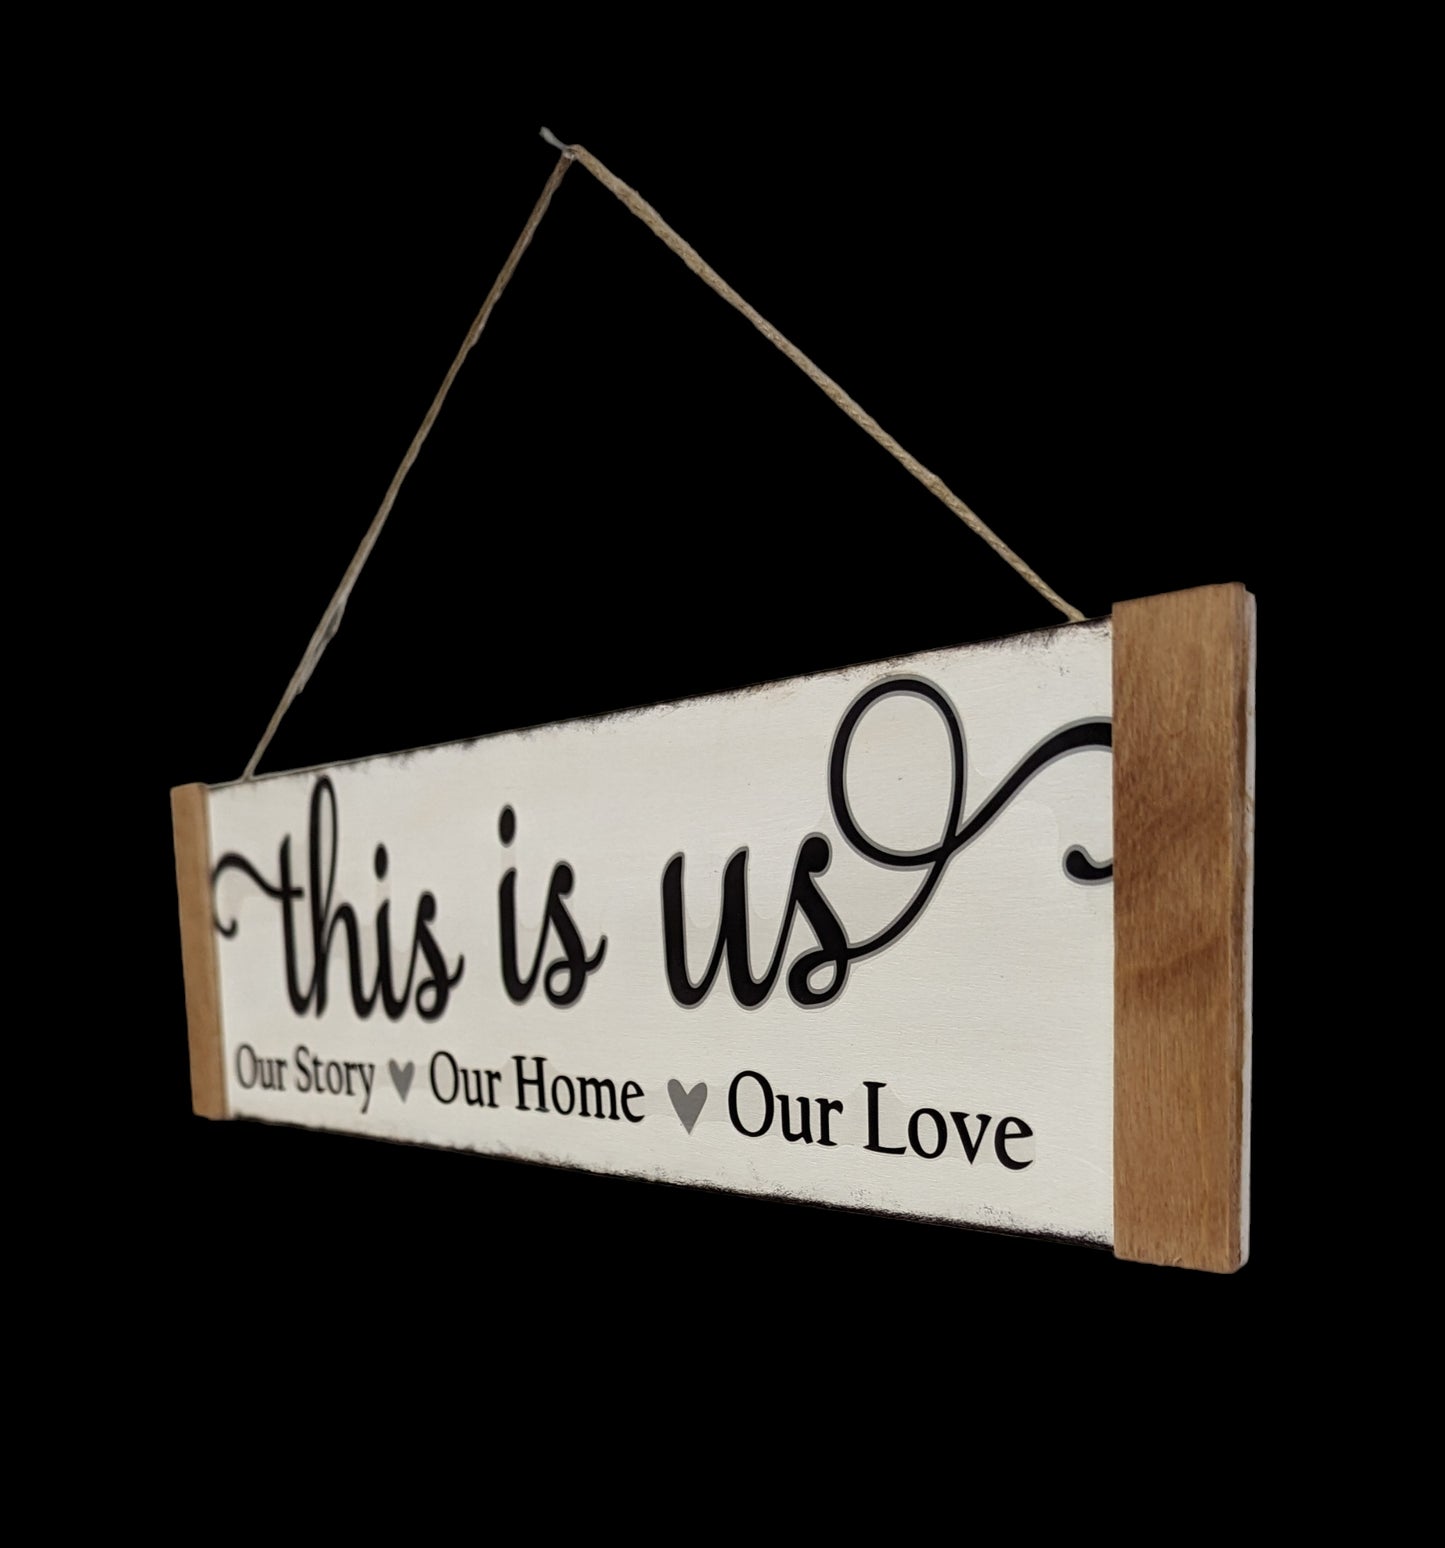 This is us sign